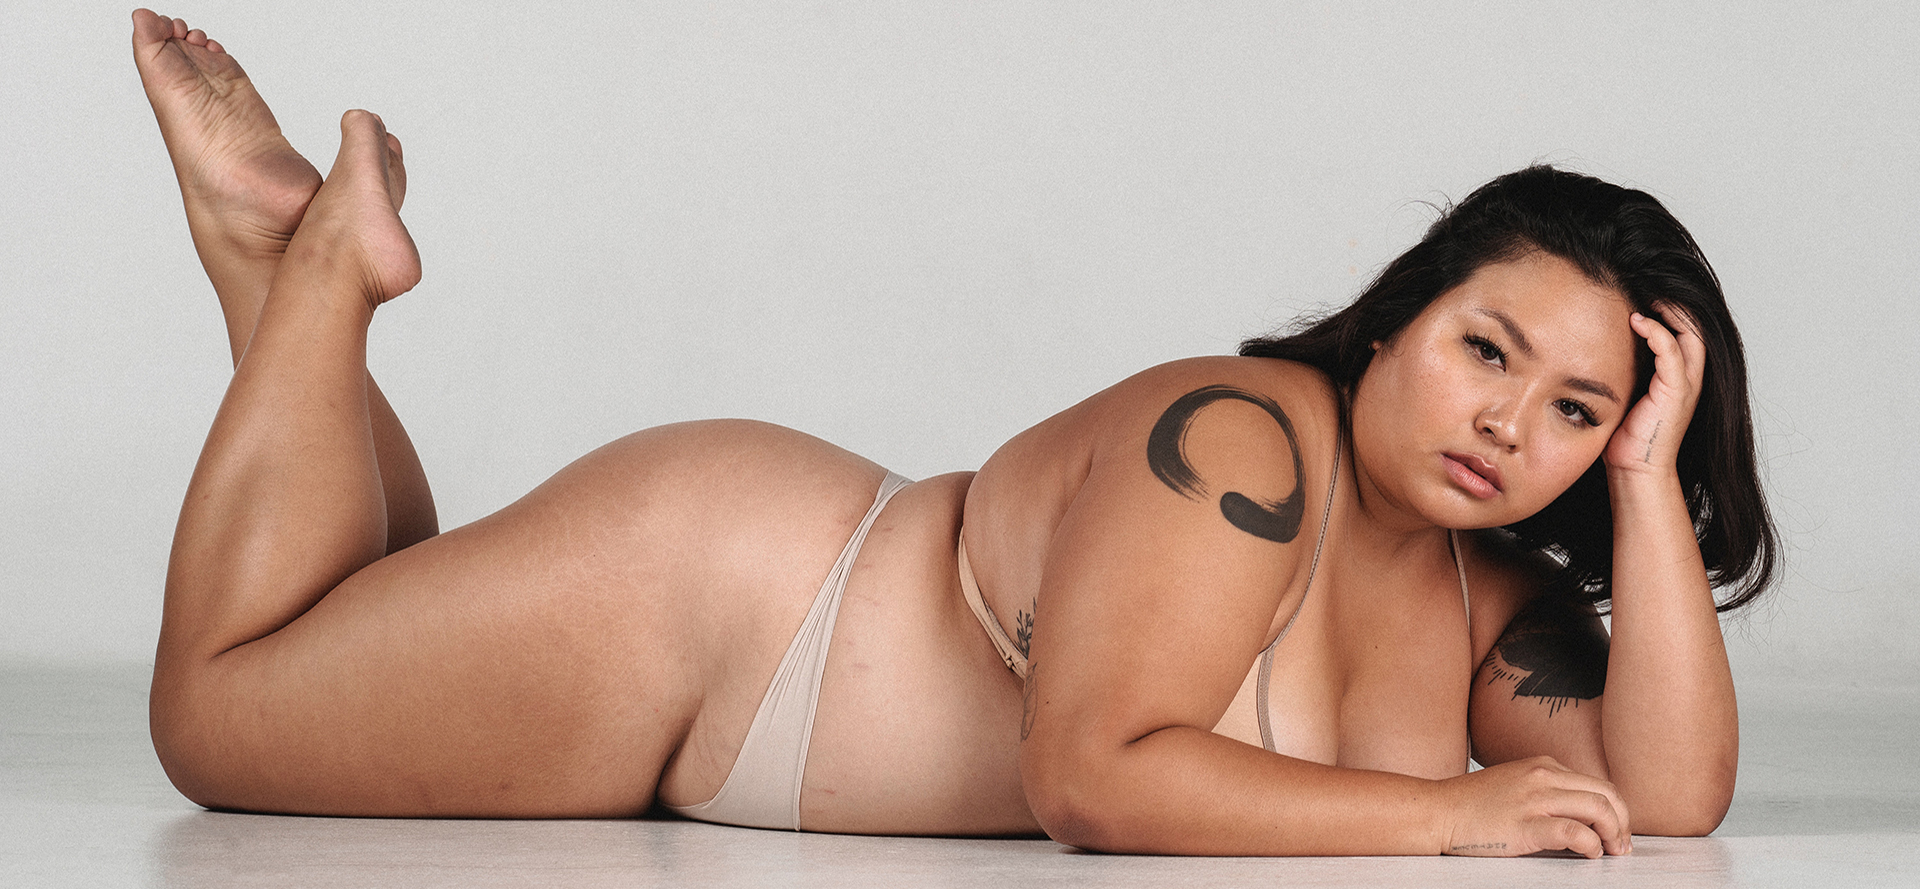 A beautiful overweight woman lies in lingerie.